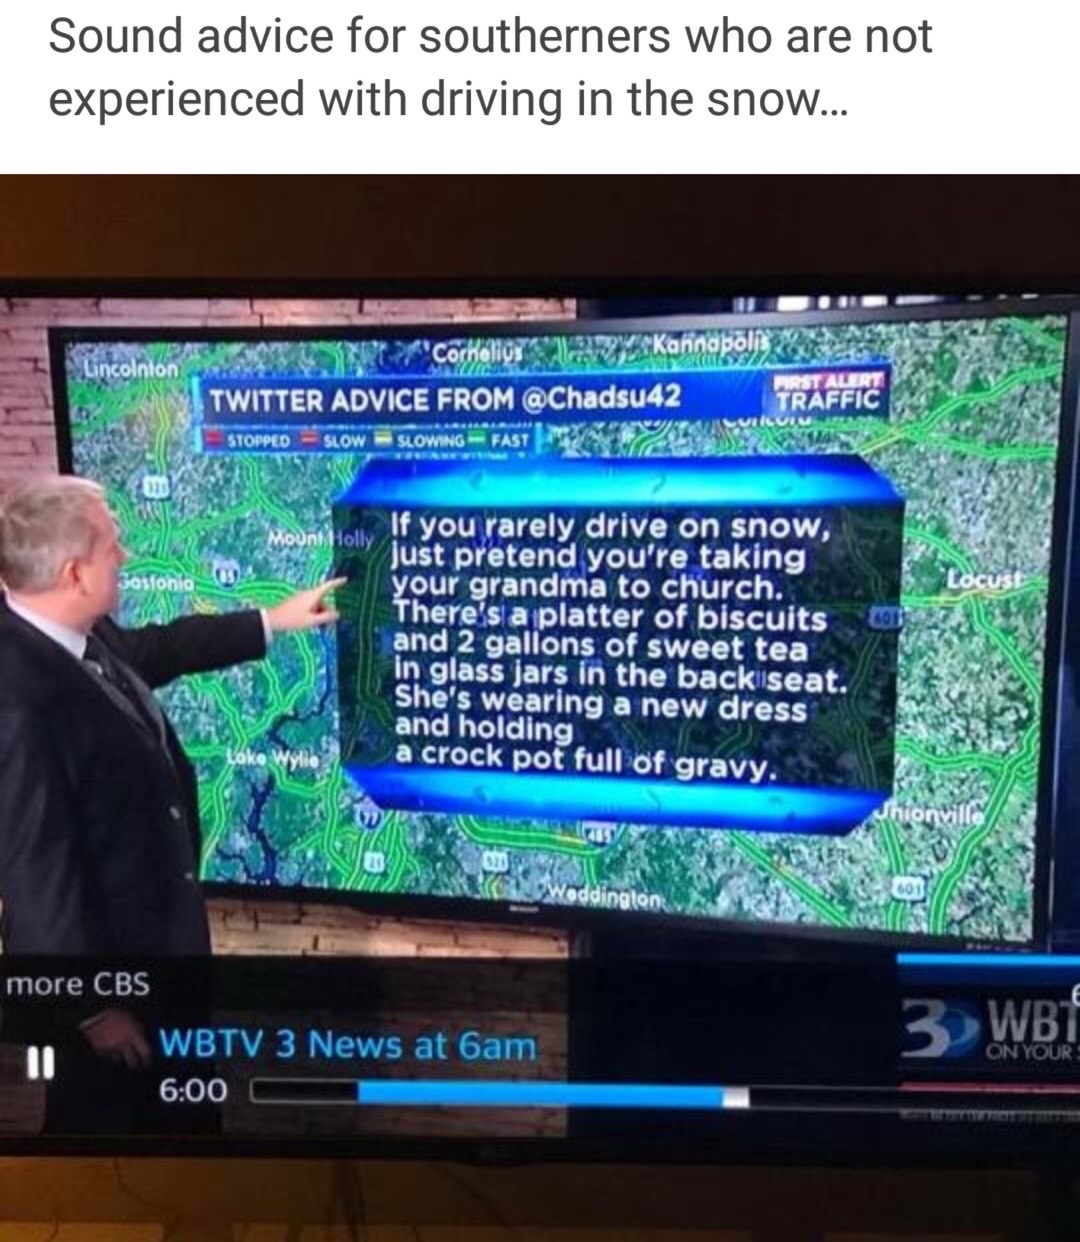 memes  - advice for southerners driving in snow - Sound advice for southerners who are not experienced with driving in the snow... Lincolnton Bakal Corhollow . Kahnapoli Twitter Advice From Traffic Stopped Slow Slowing Fast Mount Holly 30sfonia If you rar